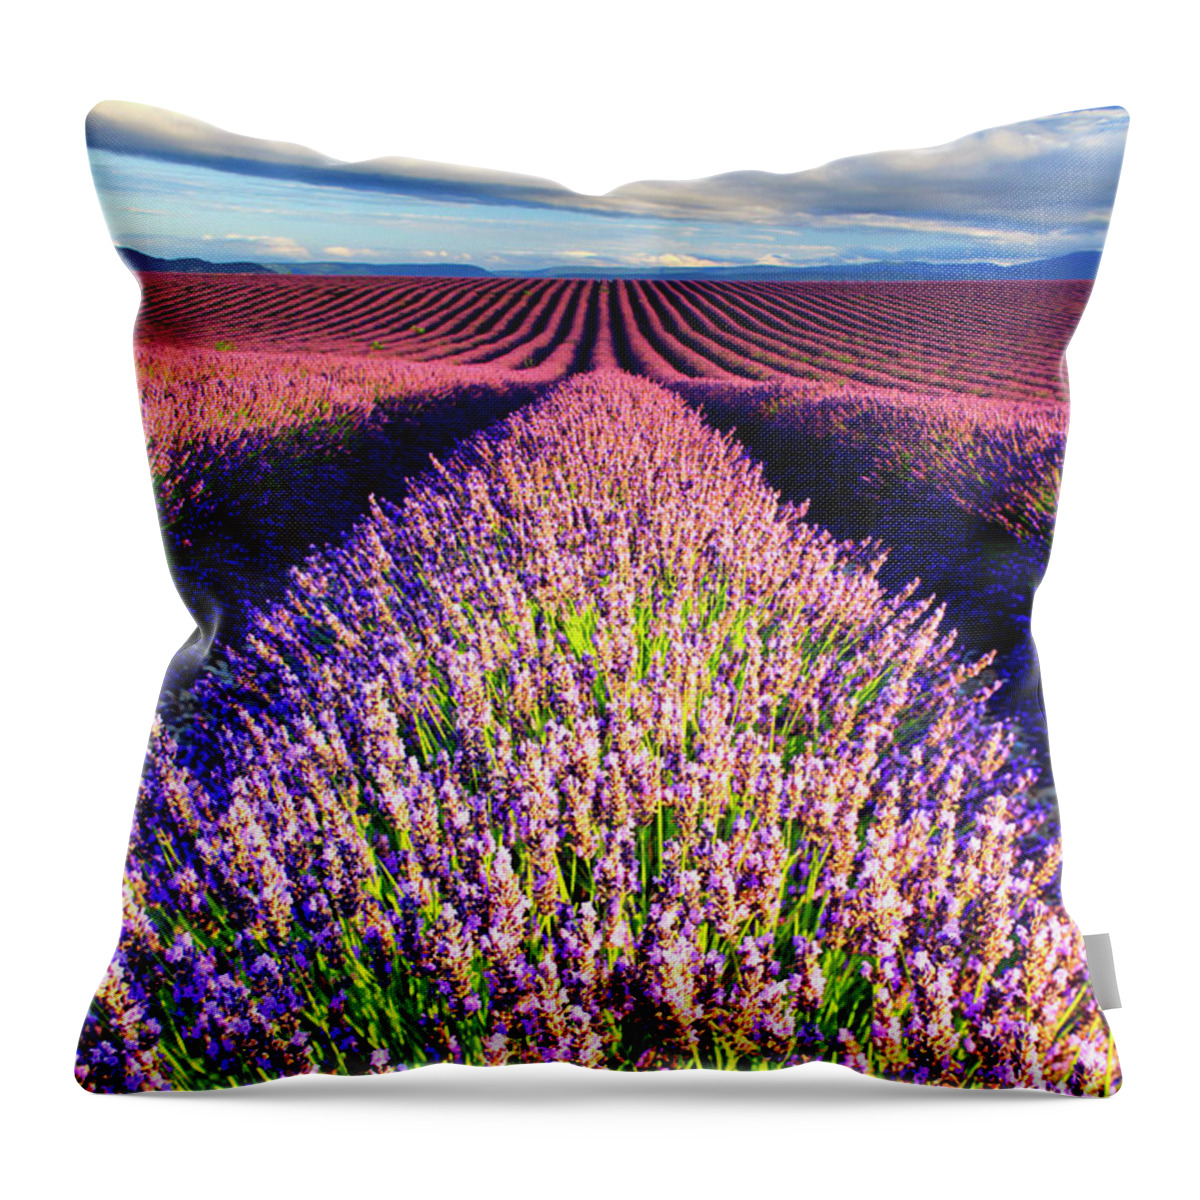 Estock Throw Pillow featuring the digital art France, Provence-alpes-cote D'azur, Provence, Valensole, Lavender Field Near Valensole #2 by Maurizio Rellini